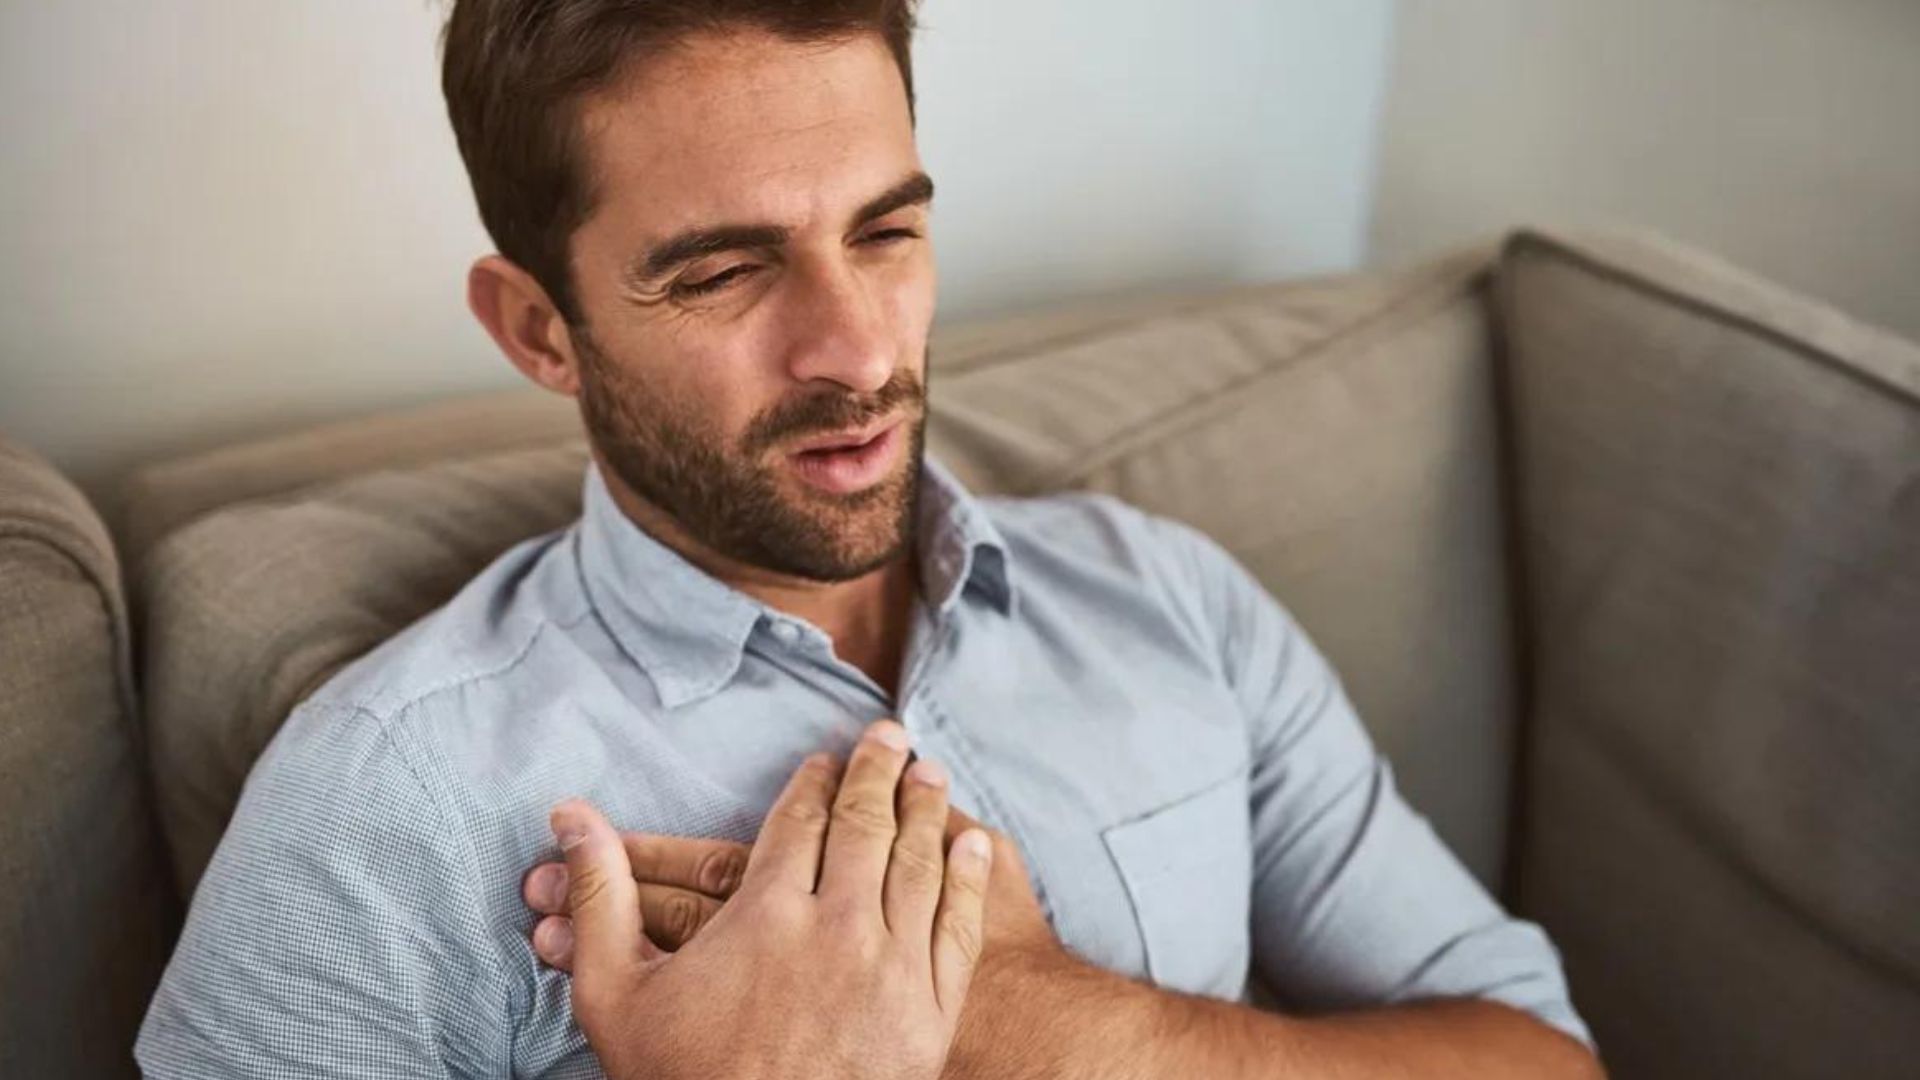 Man On Couch Having Chest Pain